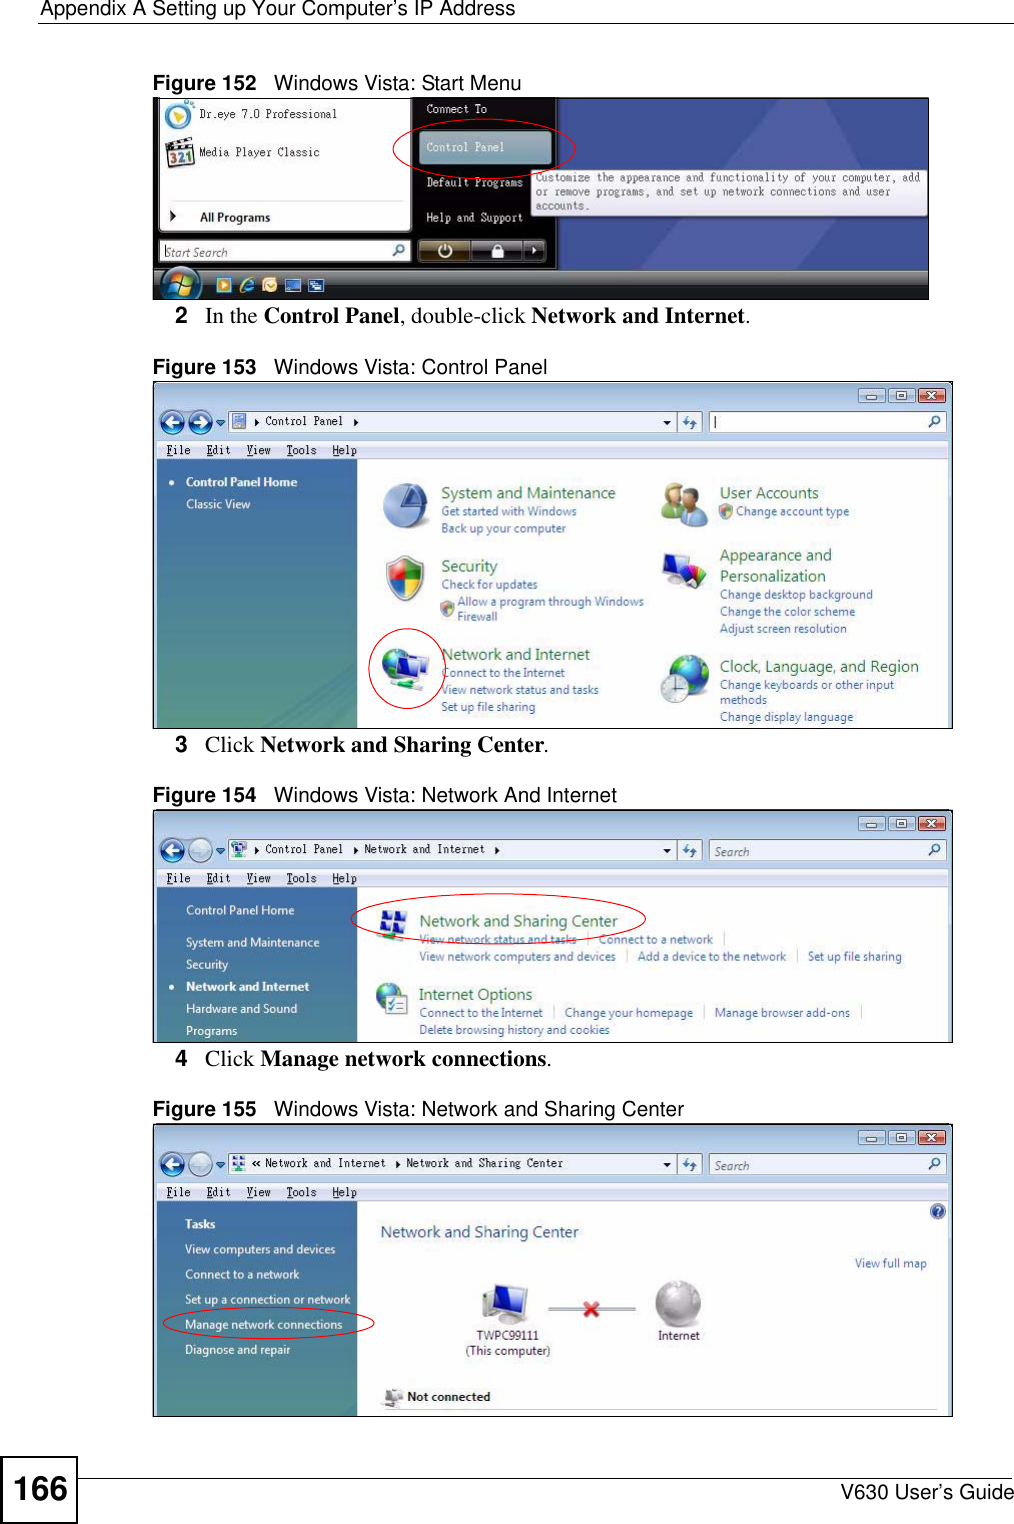 Appendix A Setting up Your Computer’s IP AddressV630 User’s Guide166Figure 152   Windows Vista: Start Menu2In the Control Panel, double-click Network and Internet.Figure 153   Windows Vista: Control Panel3Click Network and Sharing Center.Figure 154   Windows Vista: Network And Internet4Click Manage network connections.Figure 155   Windows Vista: Network and Sharing Center